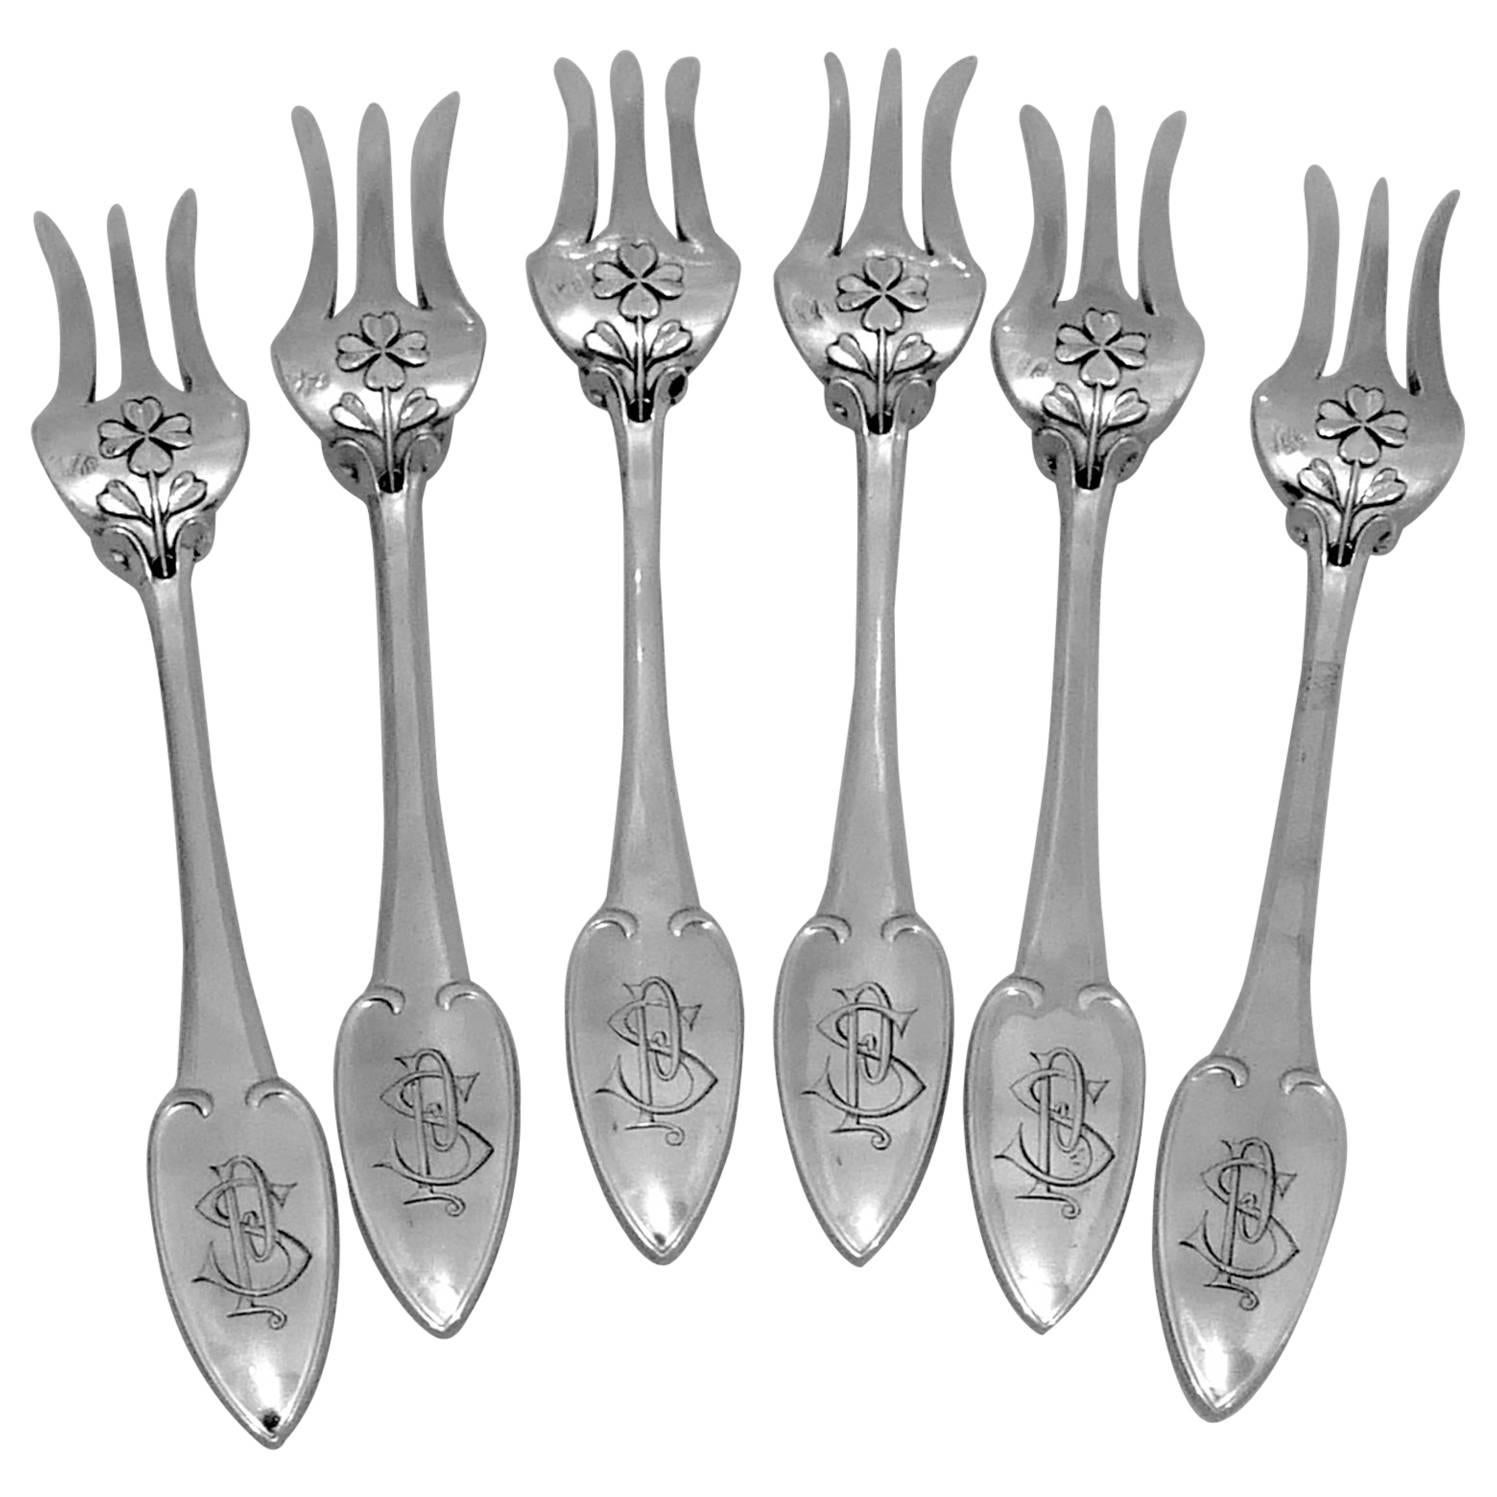 Puiforcat Rare French Sterling Silver Dessert Cake Forks Six pieces, Clovers For Sale